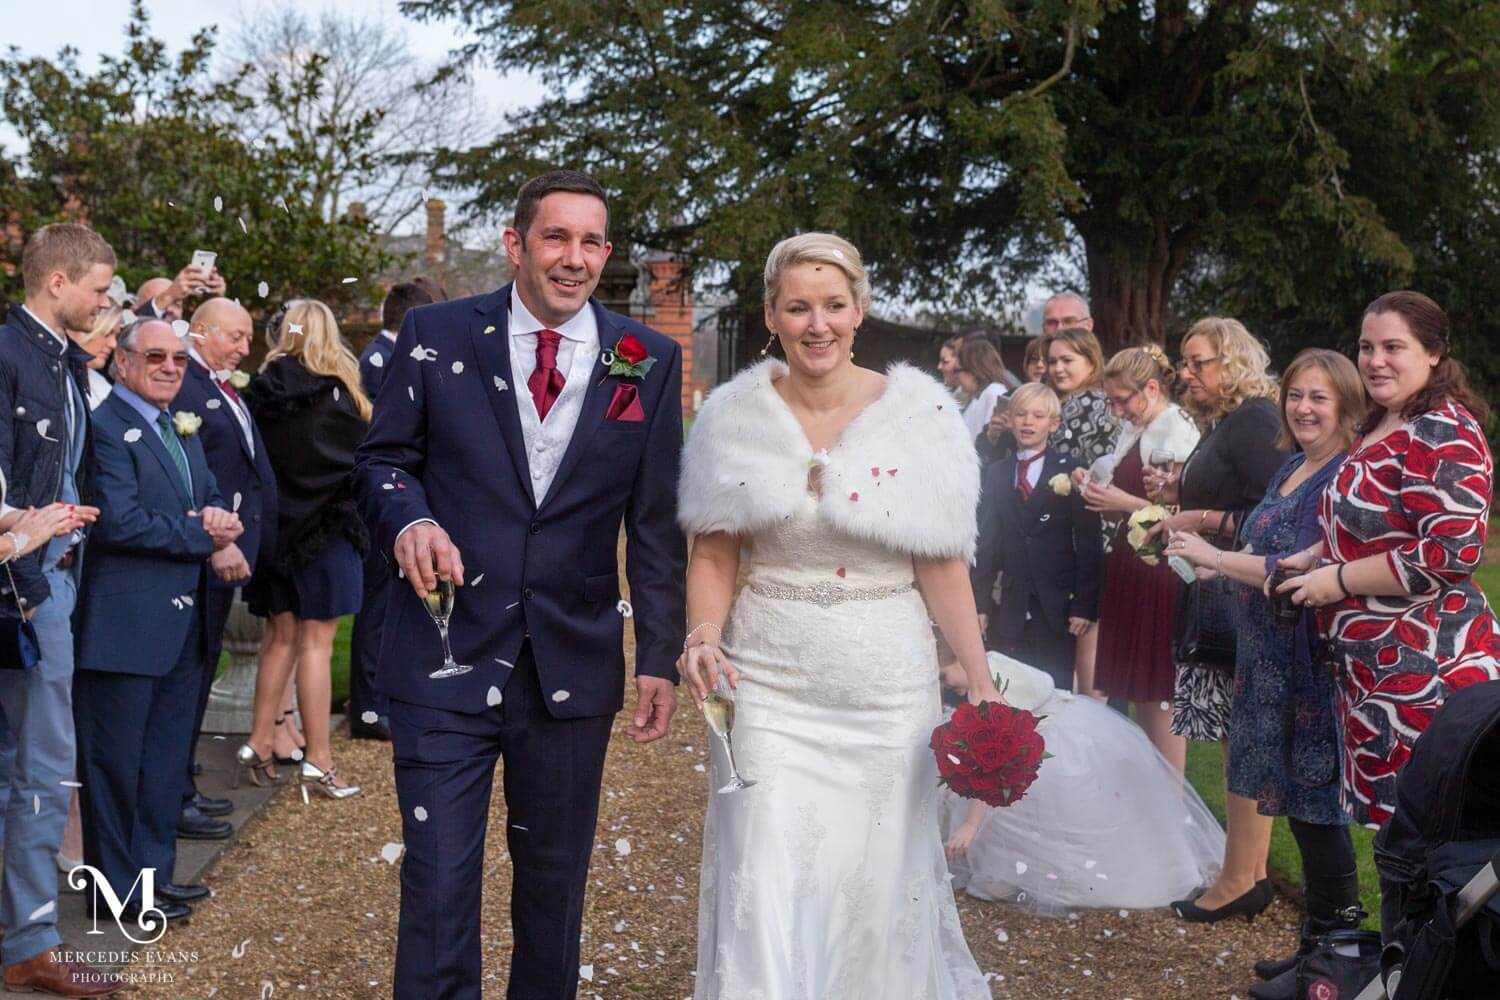 the newly weds walk as guests throw confetti in the gardens of the Elvetham Hotel